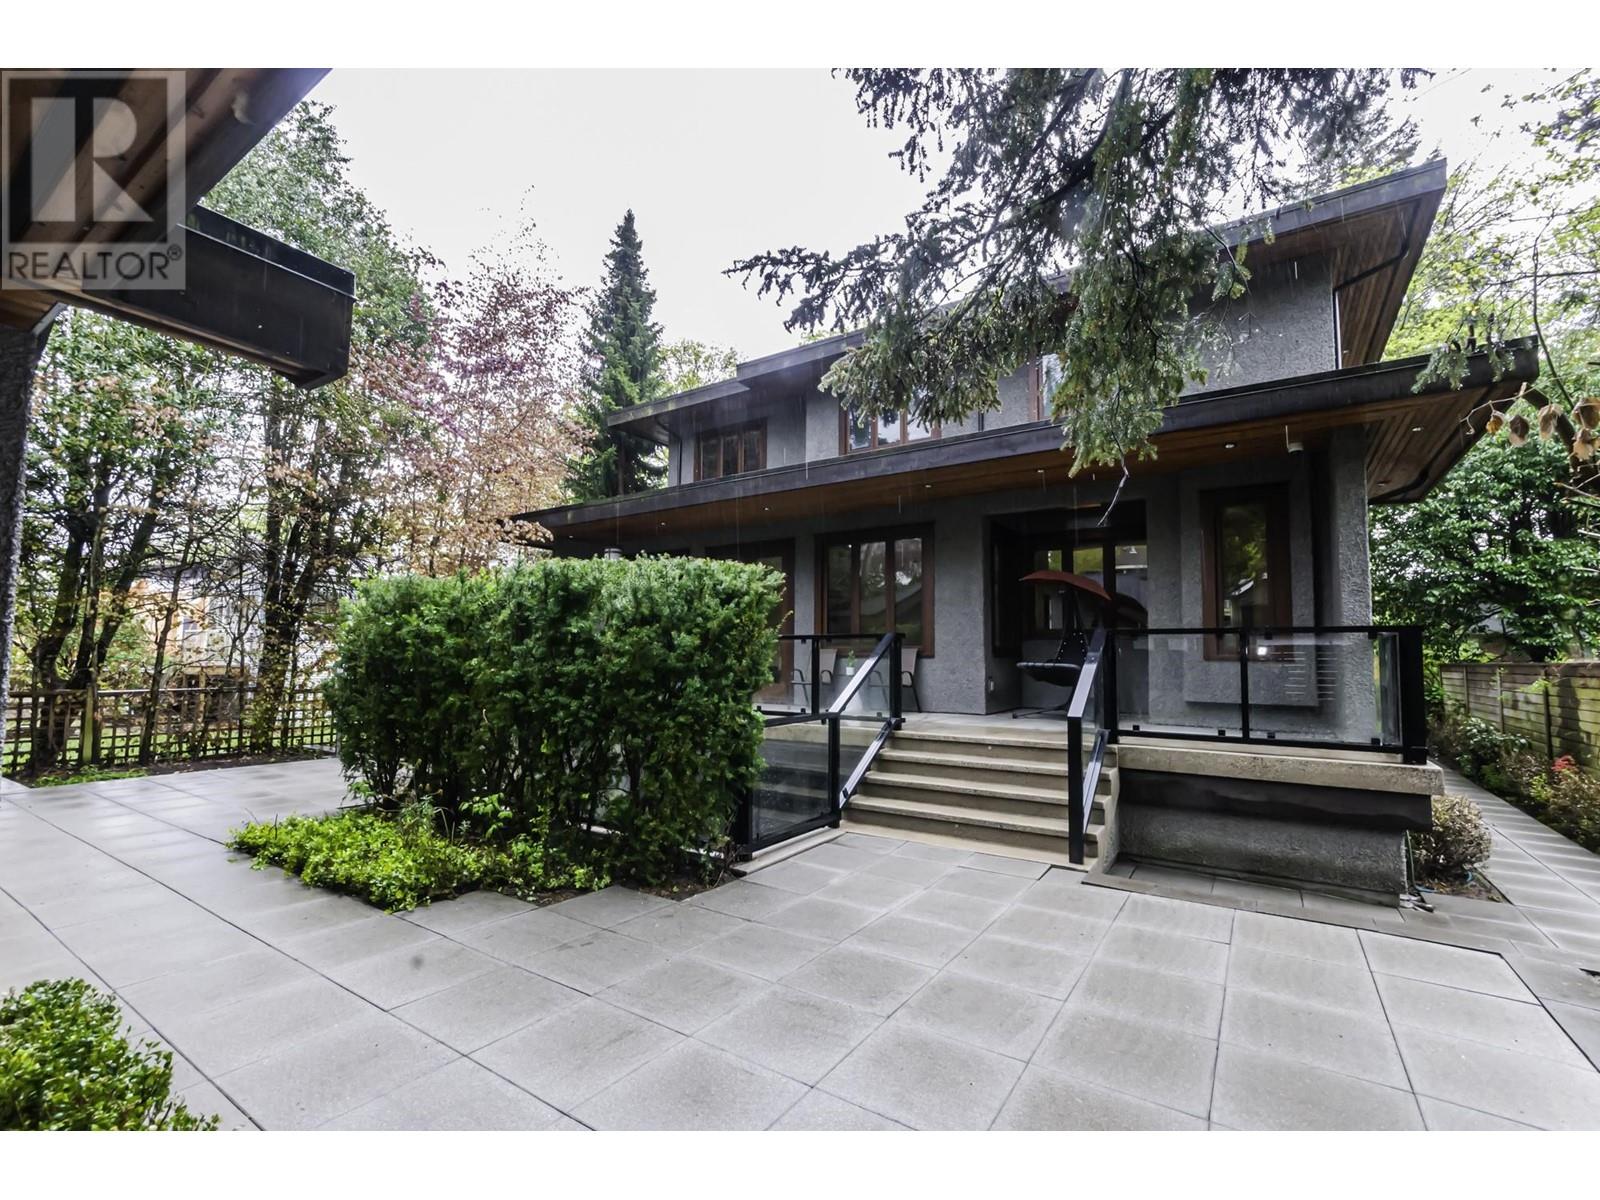 Listing Picture 32 of 38 : 3875 W 36TH AVENUE, Vancouver / 溫哥華 - 魯藝地產 Yvonne Lu Group - MLS Medallion Club Member